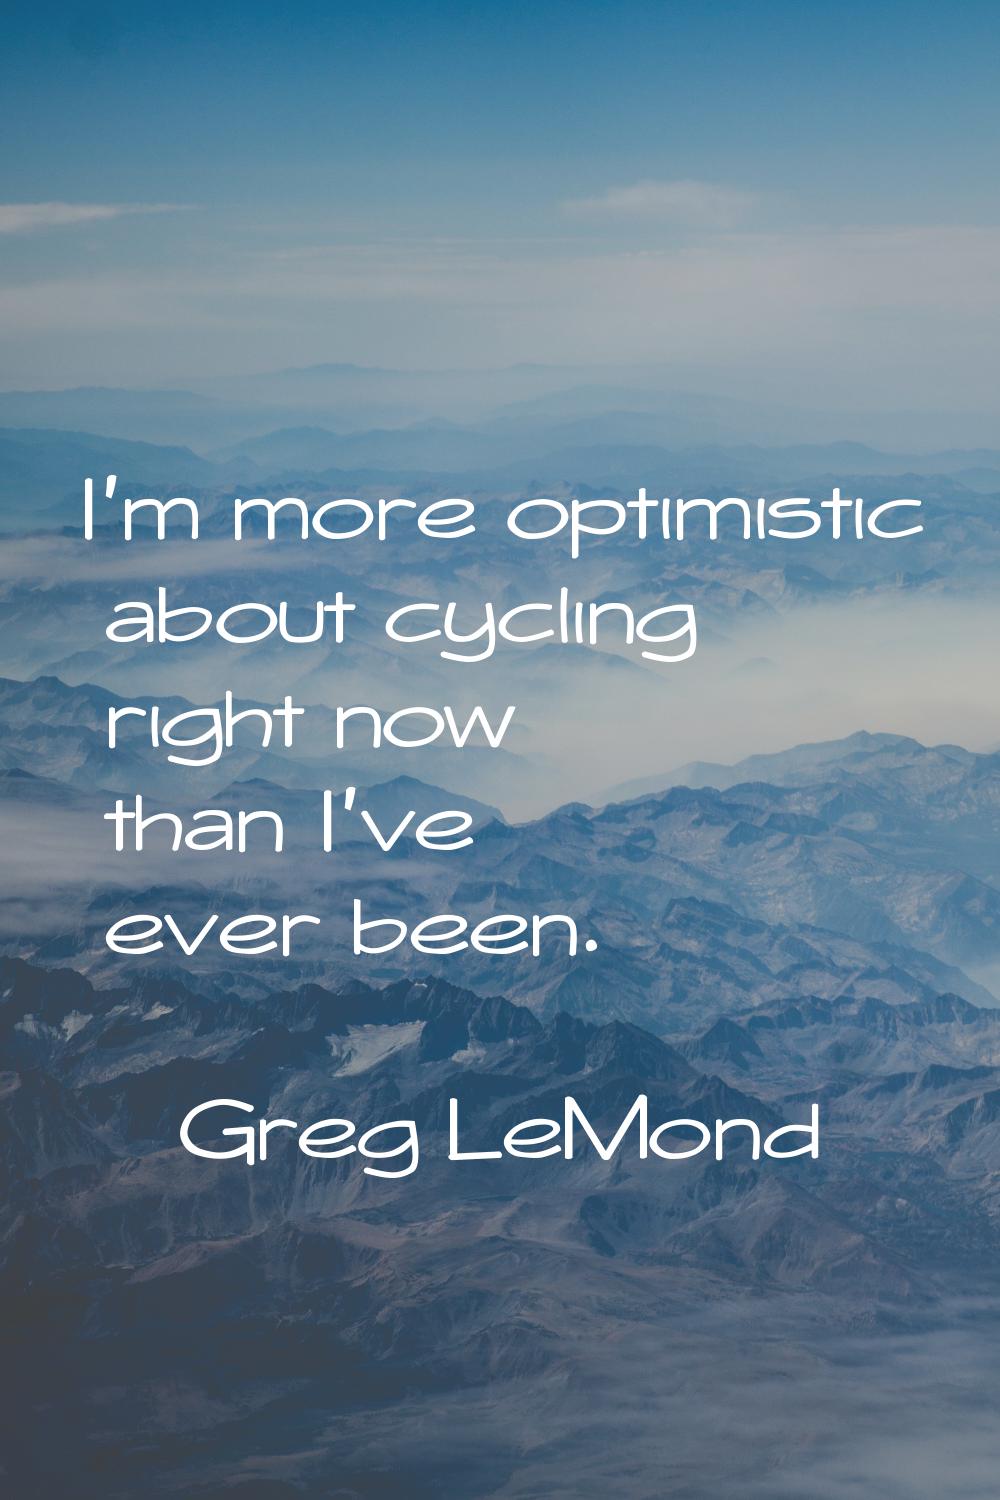 I'm more optimistic about cycling right now than I've ever been.